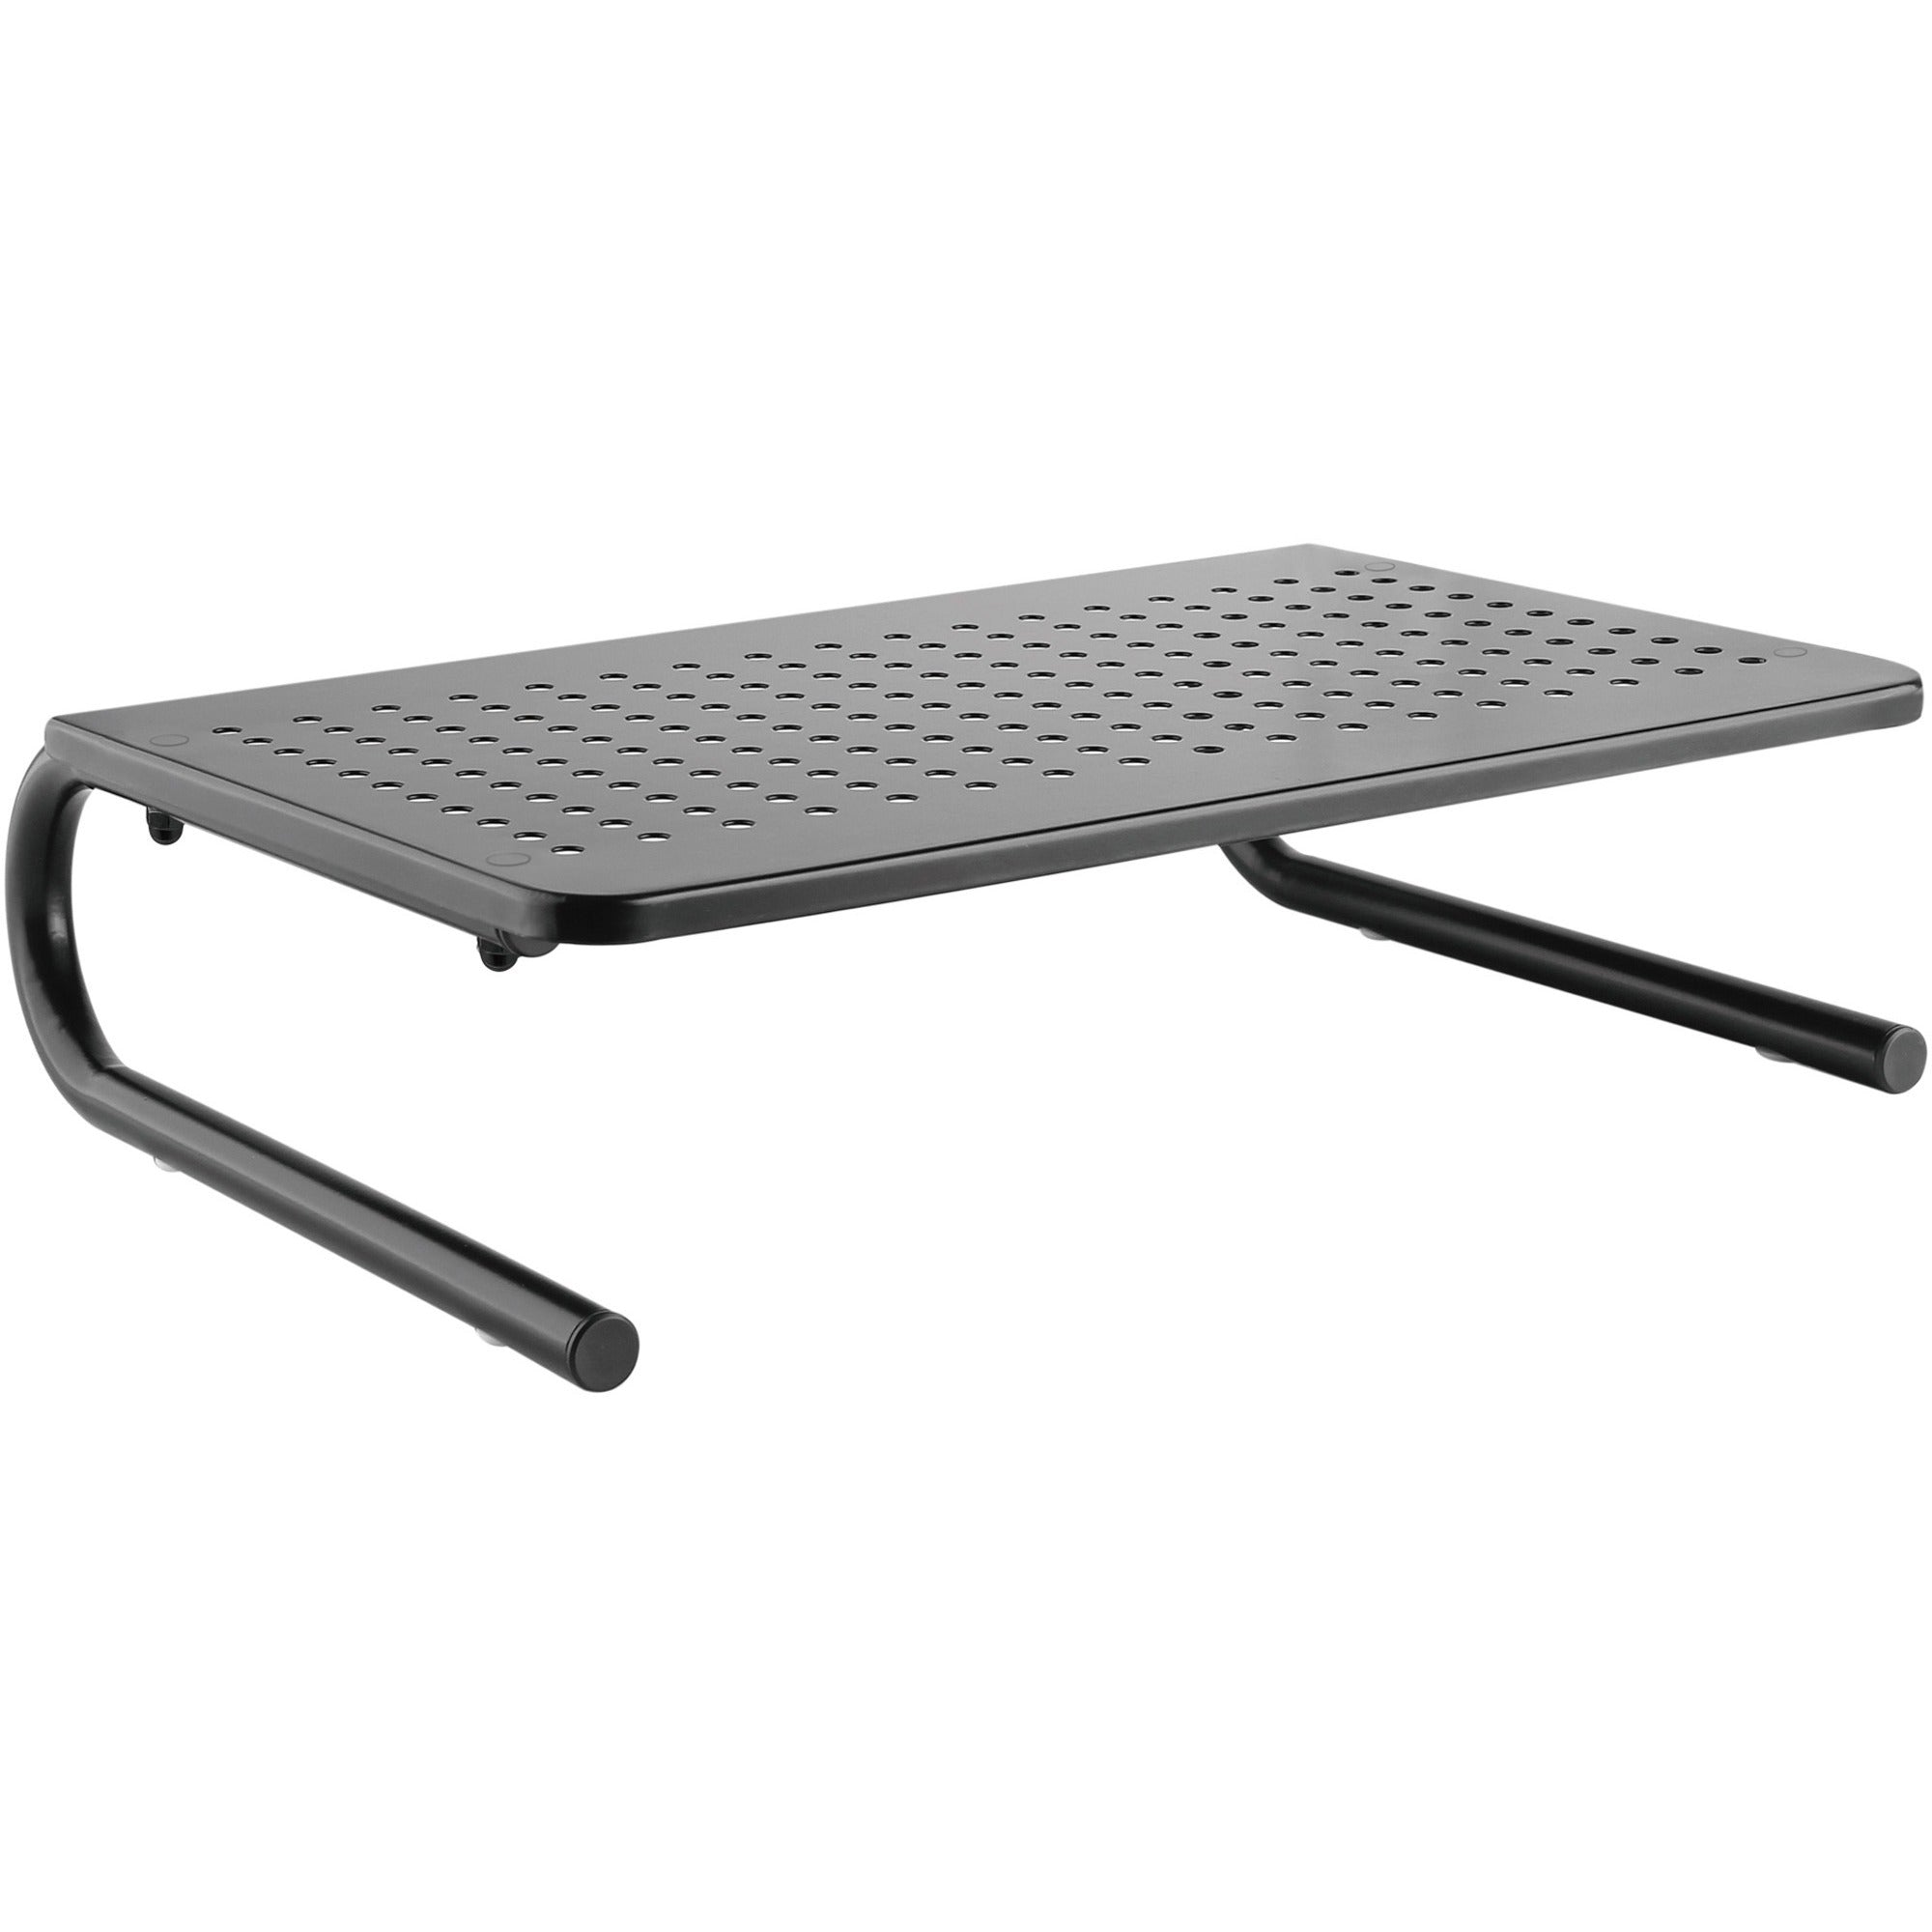 lorell-monitor-laptop-stand-20-lb-load-capacity-55-height-x-145-depth-desktop-steel-black-for-monitor-notebook-ventilated-rubber-pad-non-skid_llr18330 - 1